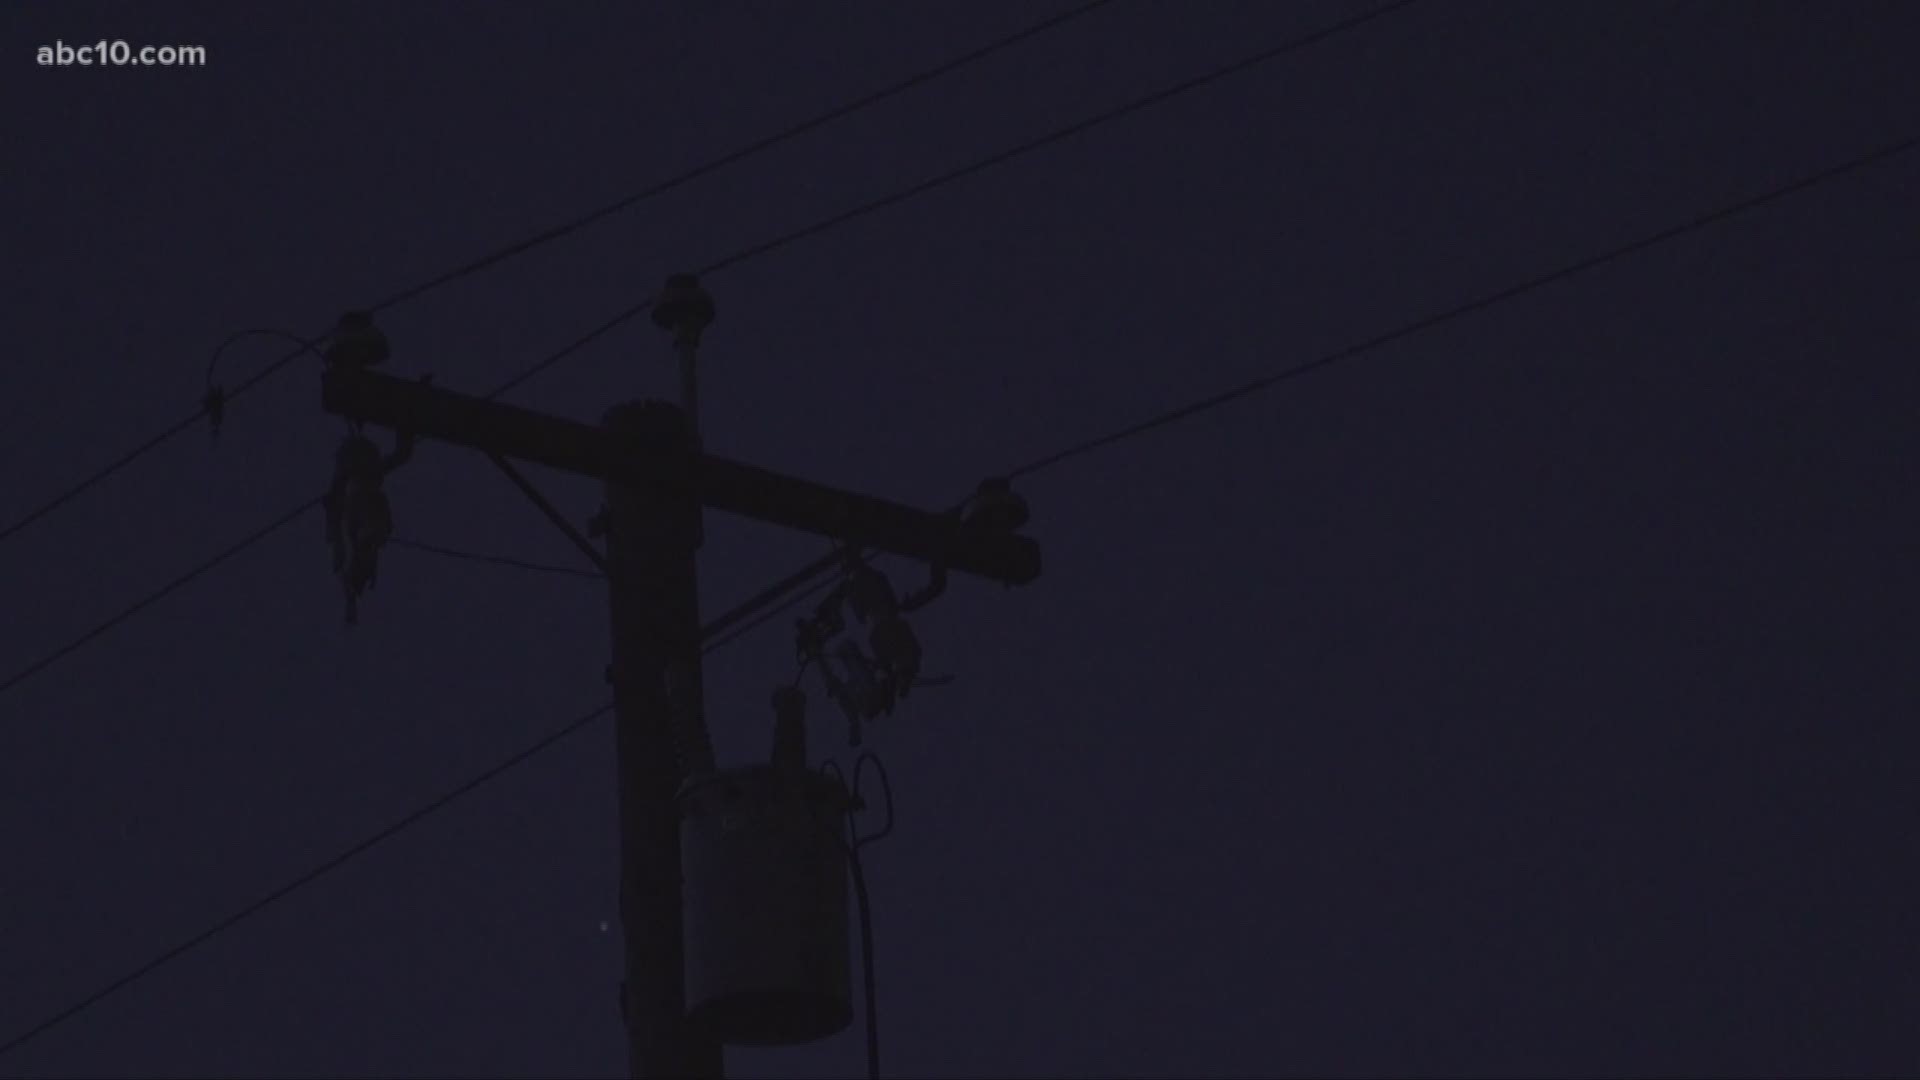 PG&E crews are working to restoring electricity to tens of thousands of people after intentionally cutting their power because of concerns about high winds. But residents in Pleasant Valley are still waiting for the lights to come back on.